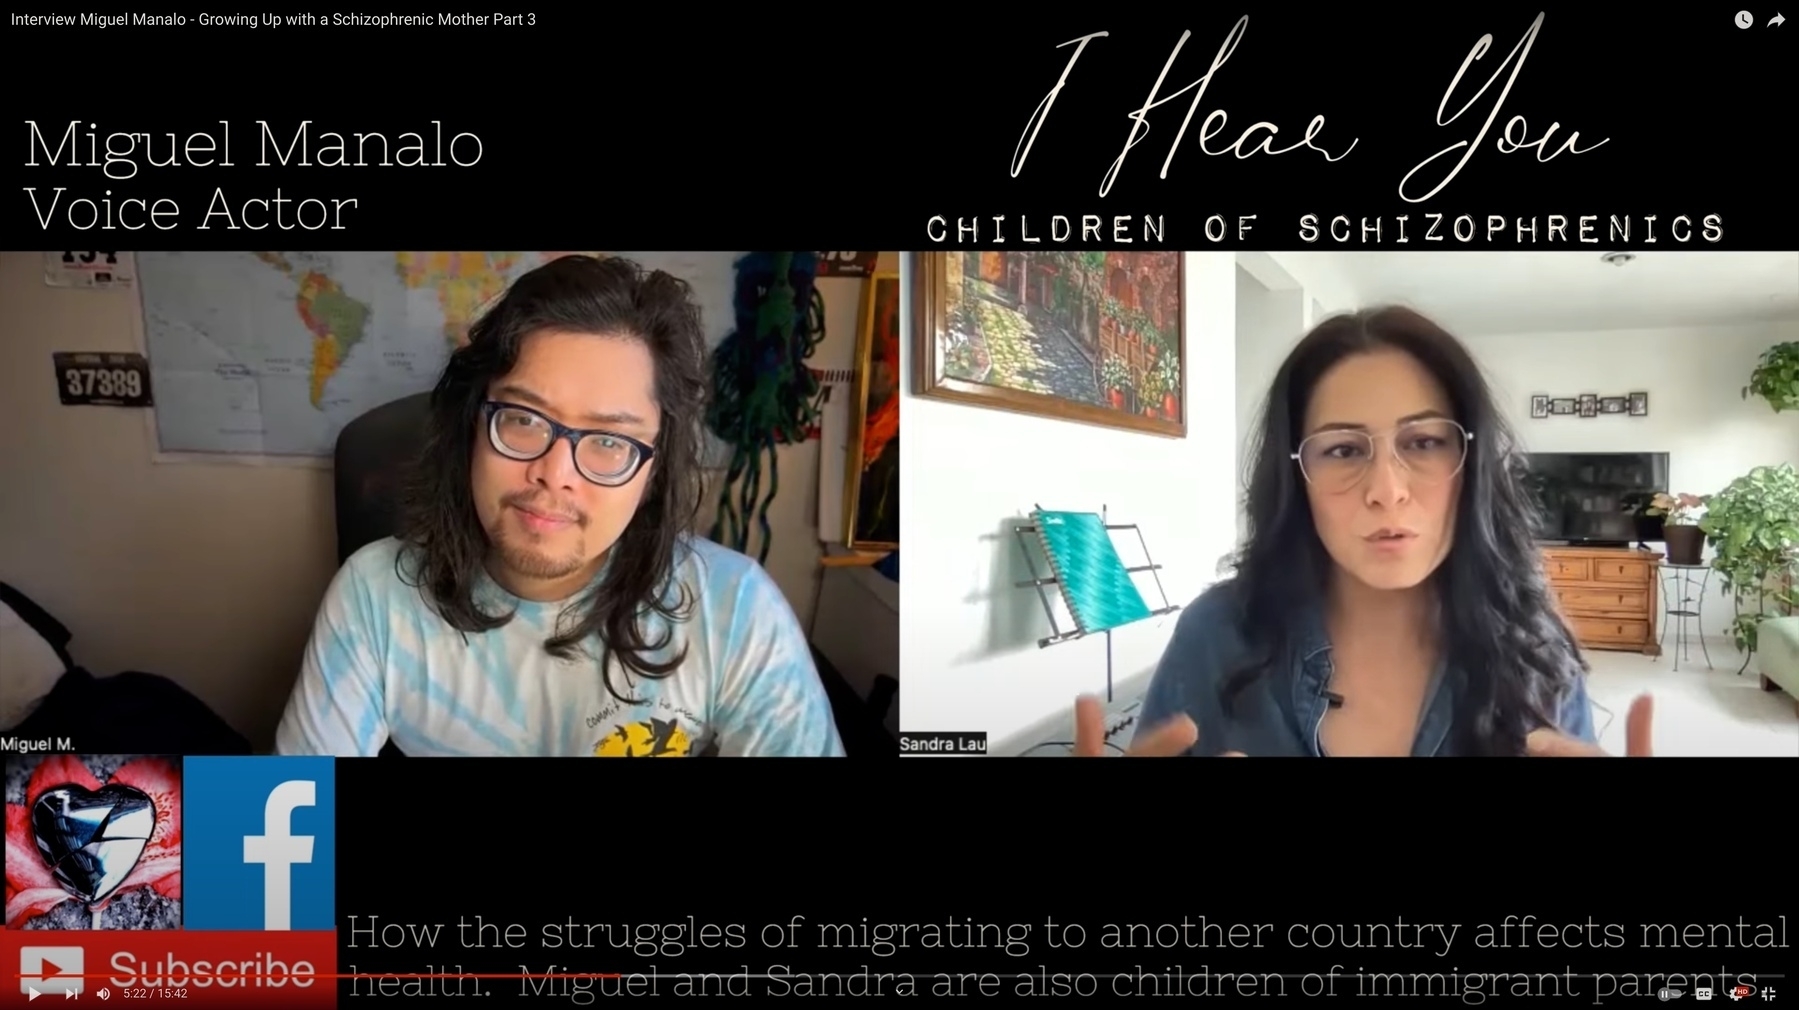 Interview Miguel Manalo - Growing Up with a Schizophrenic Mother Part 3
Miguel Manalo Voice Actor
I Hear You CHILDREN OF SCHIZOPHRENICS
Miguel M. Sandra Lau
How the struggles of migrating to another country affects mental health. Miguel and Sandra are also children of immigrant parents